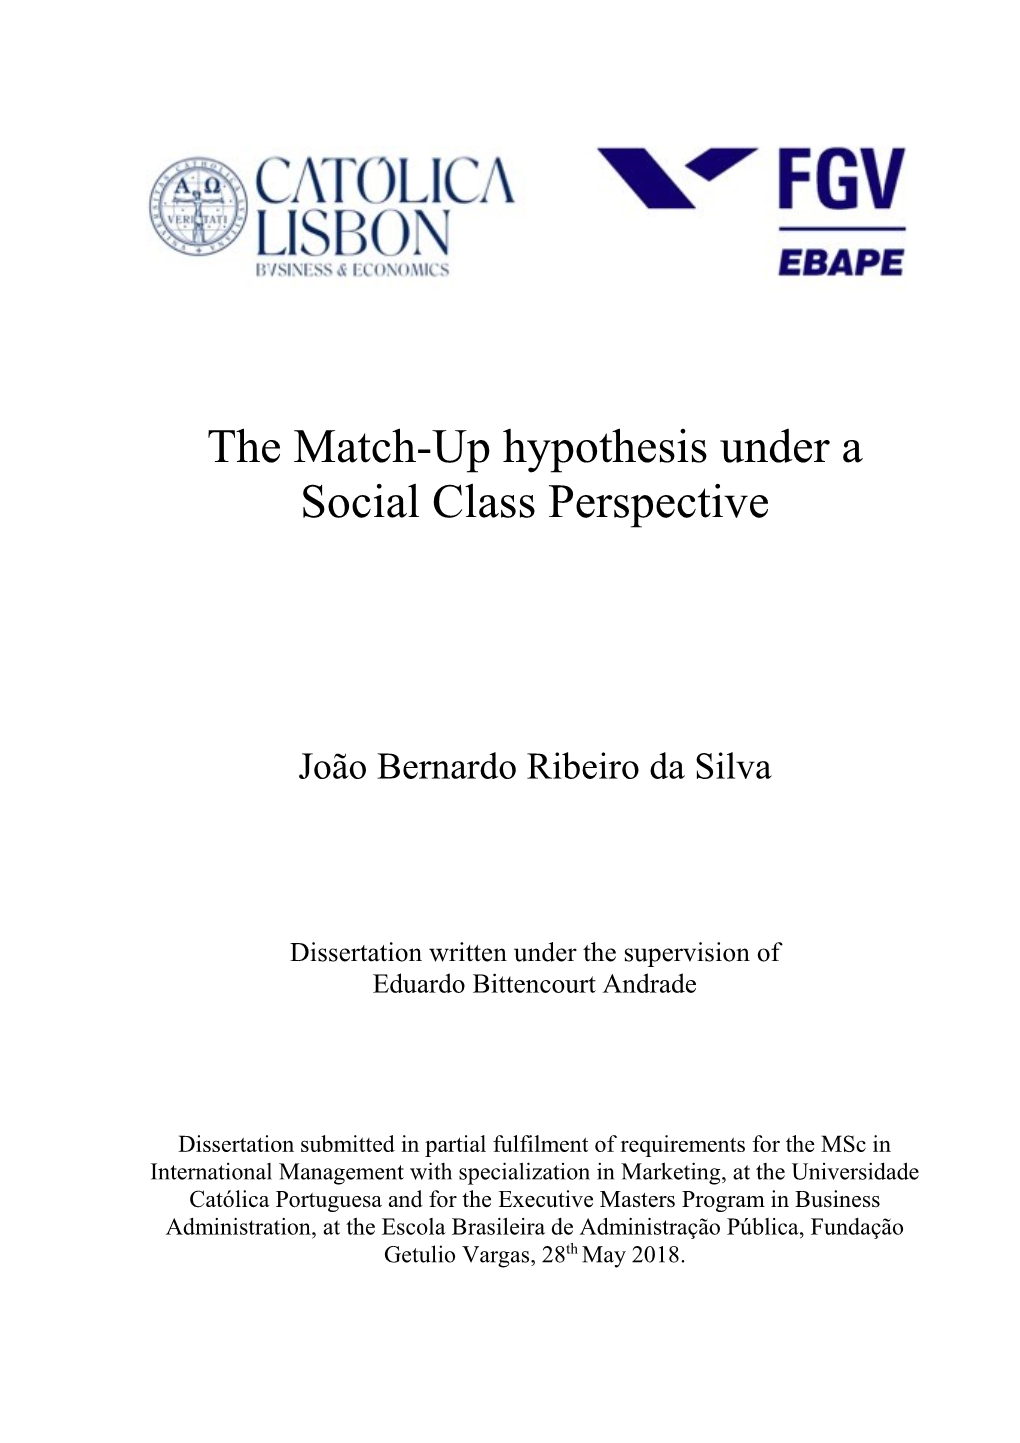 The Match-Up Hypothesis Under a Social Class Perspective